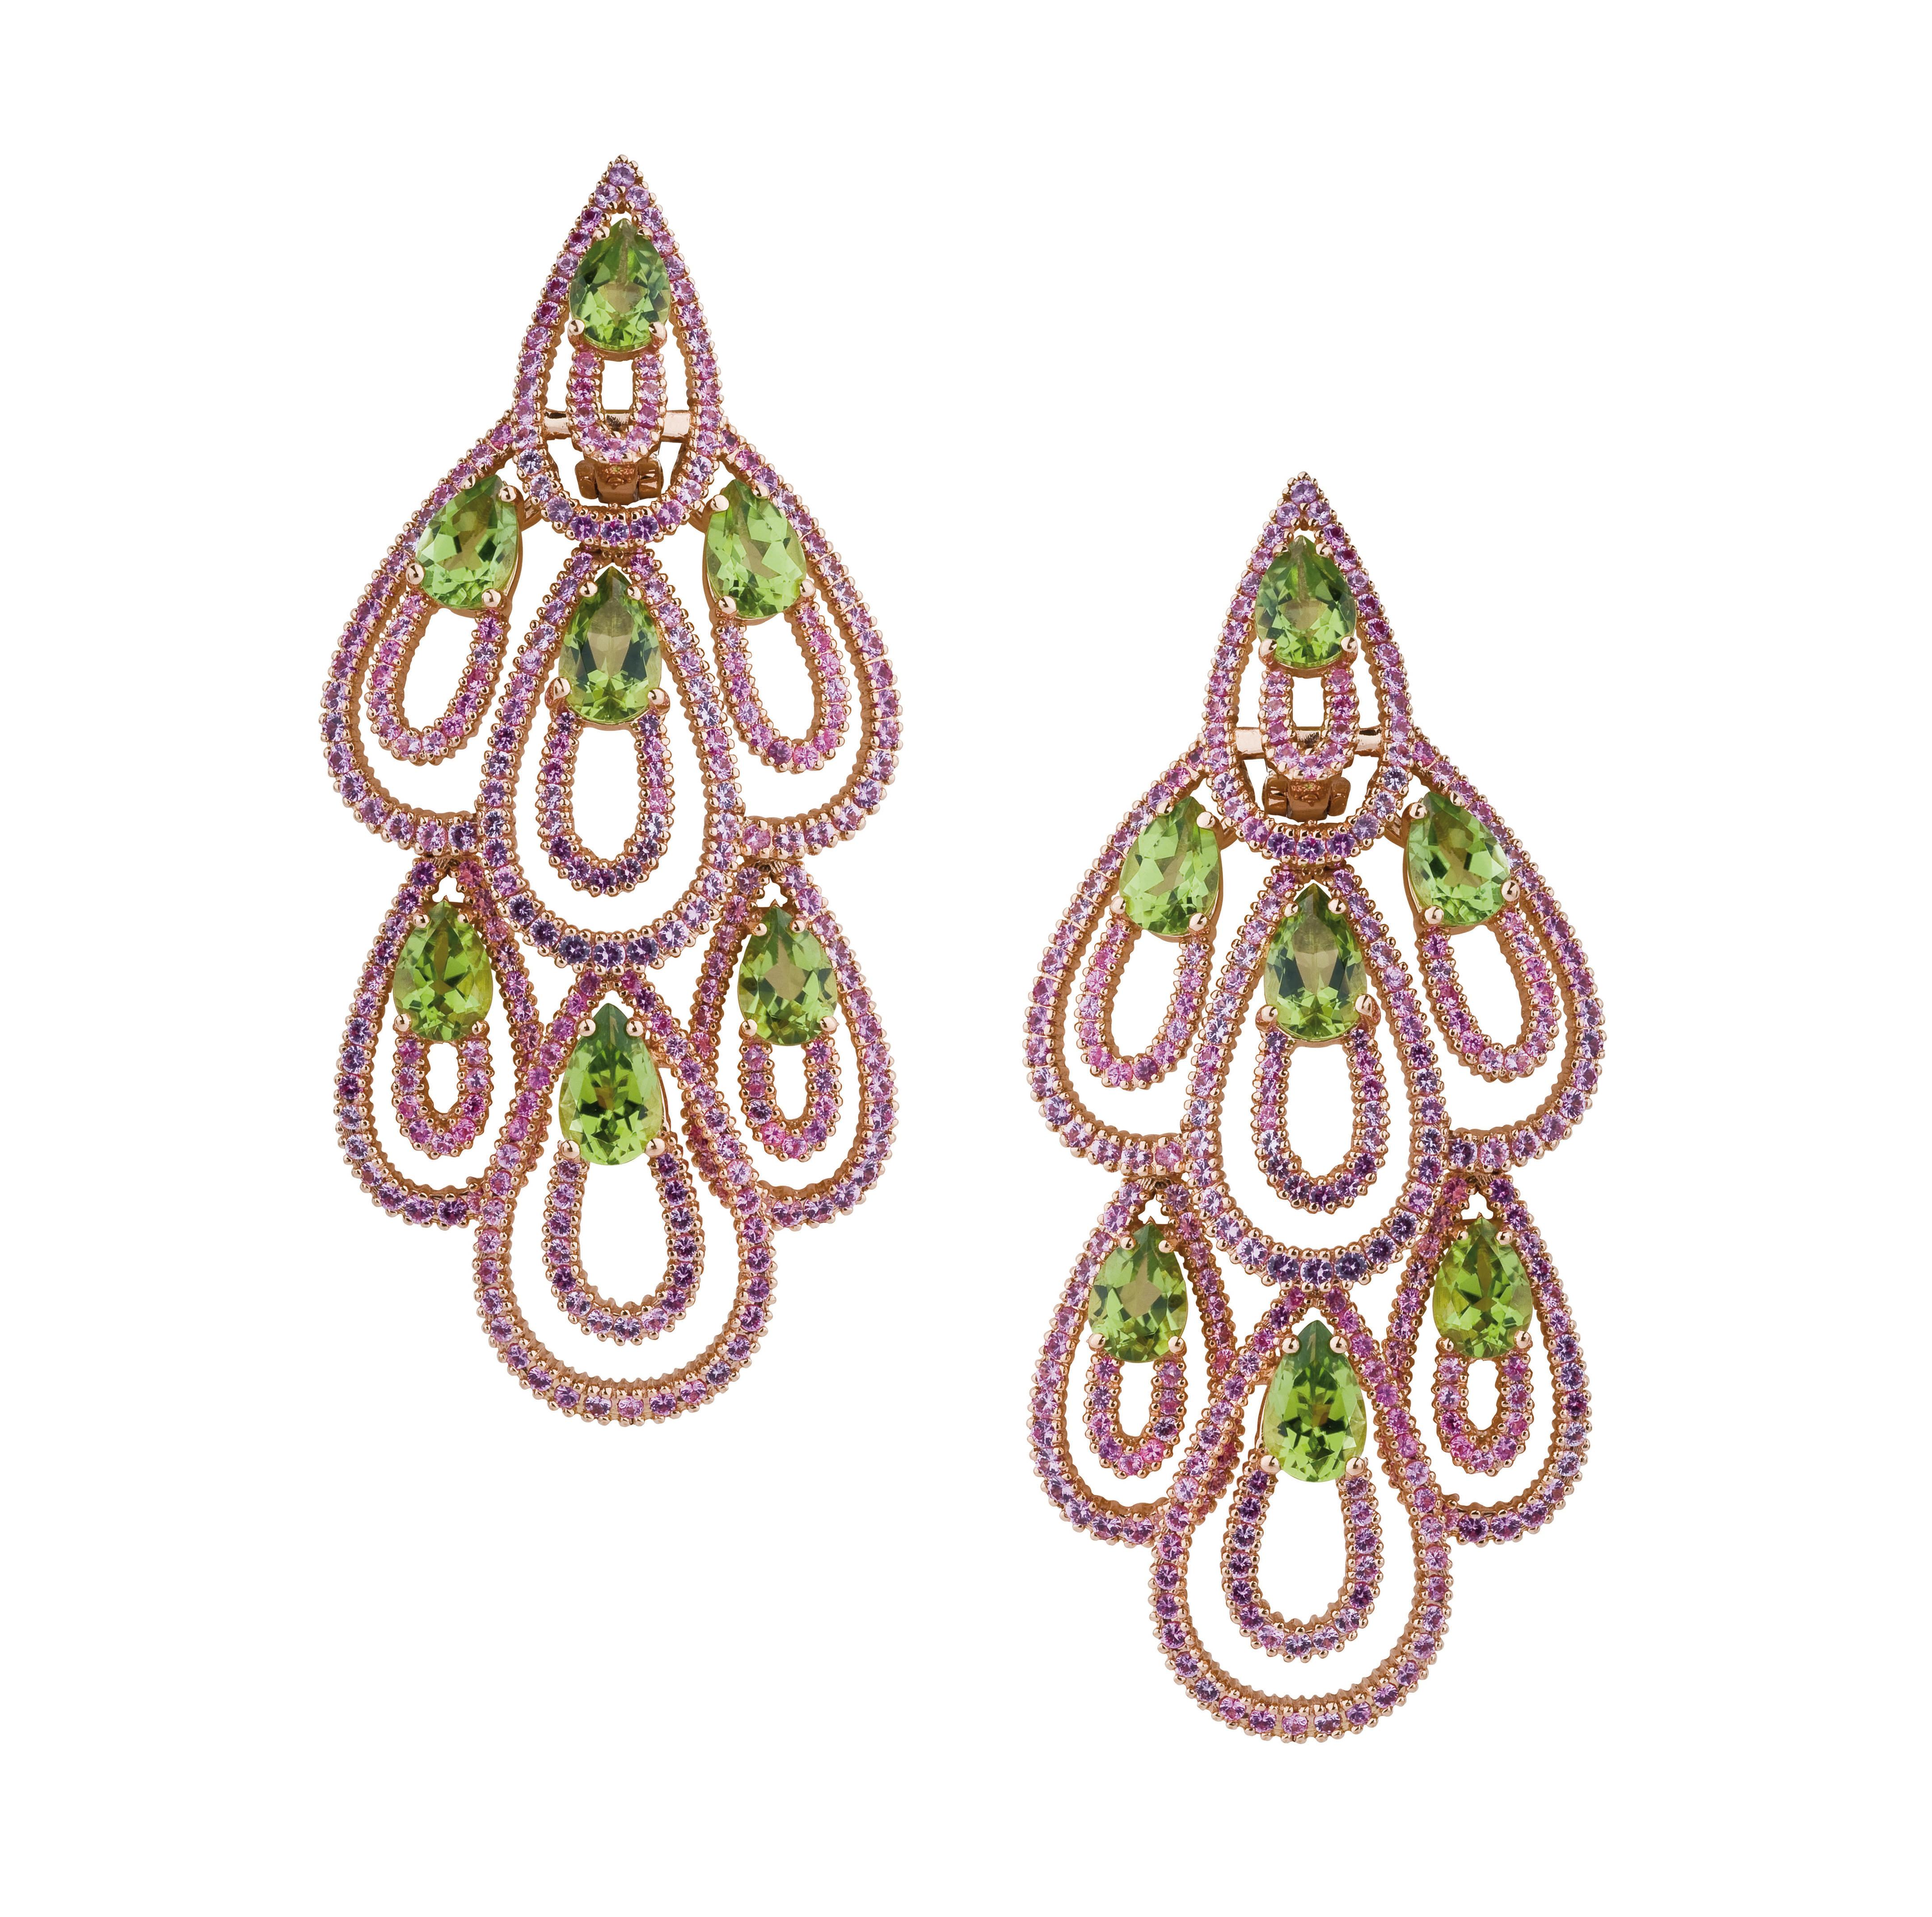 Pink Sapphire and Peridot Earrings mounted on rose gold 18K.
Sapphires: 6.40 carats, Peridot: 11.30 carats.
Total weight: 39.30 grams.